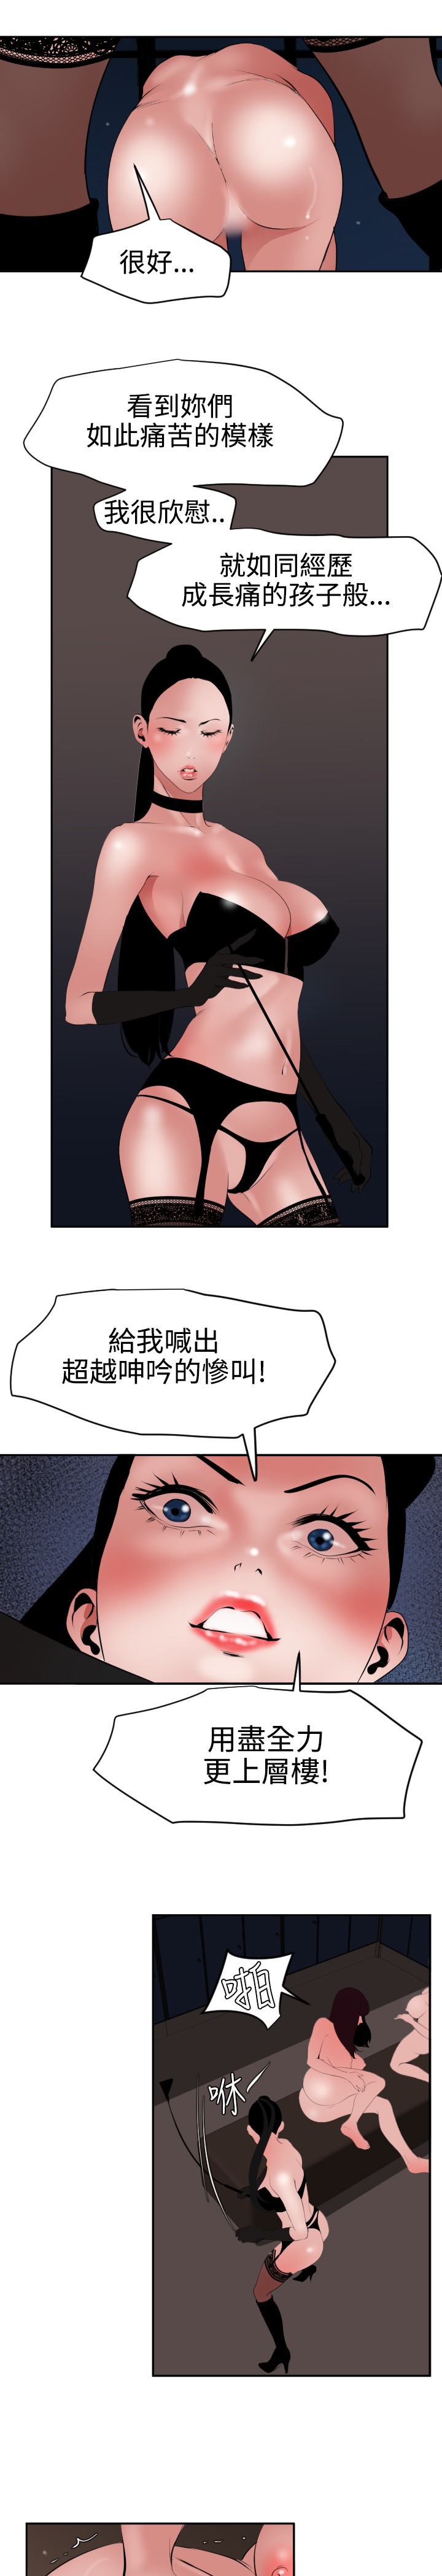 Desire King 欲求王 Ch.41~51 [Chinese] [黑嘿嘿] 慾求王